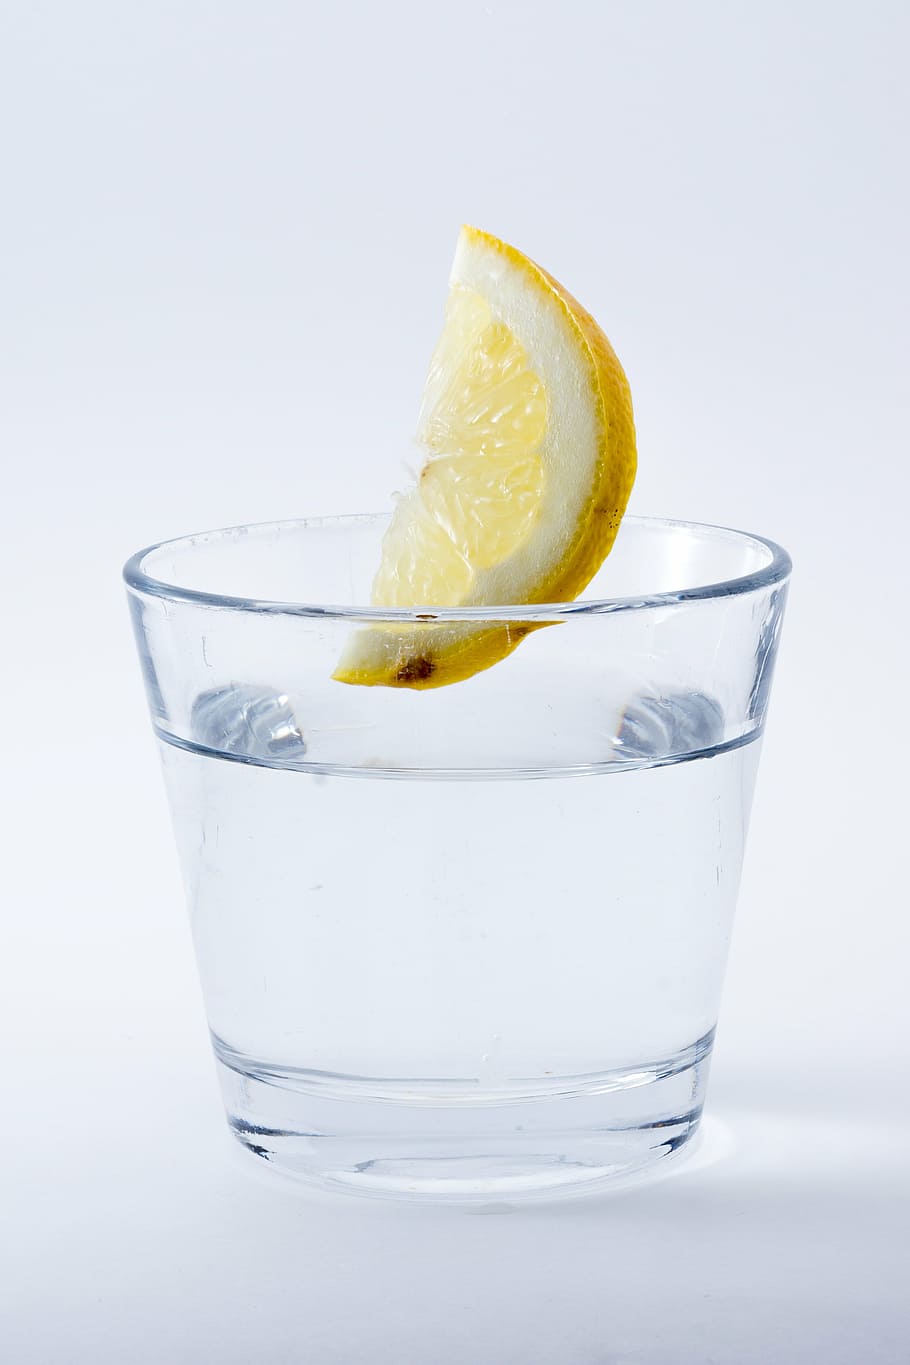 lemon, drop, glass, water, drink, refreshment, immersion, drinking glass, studio shot, food and drink